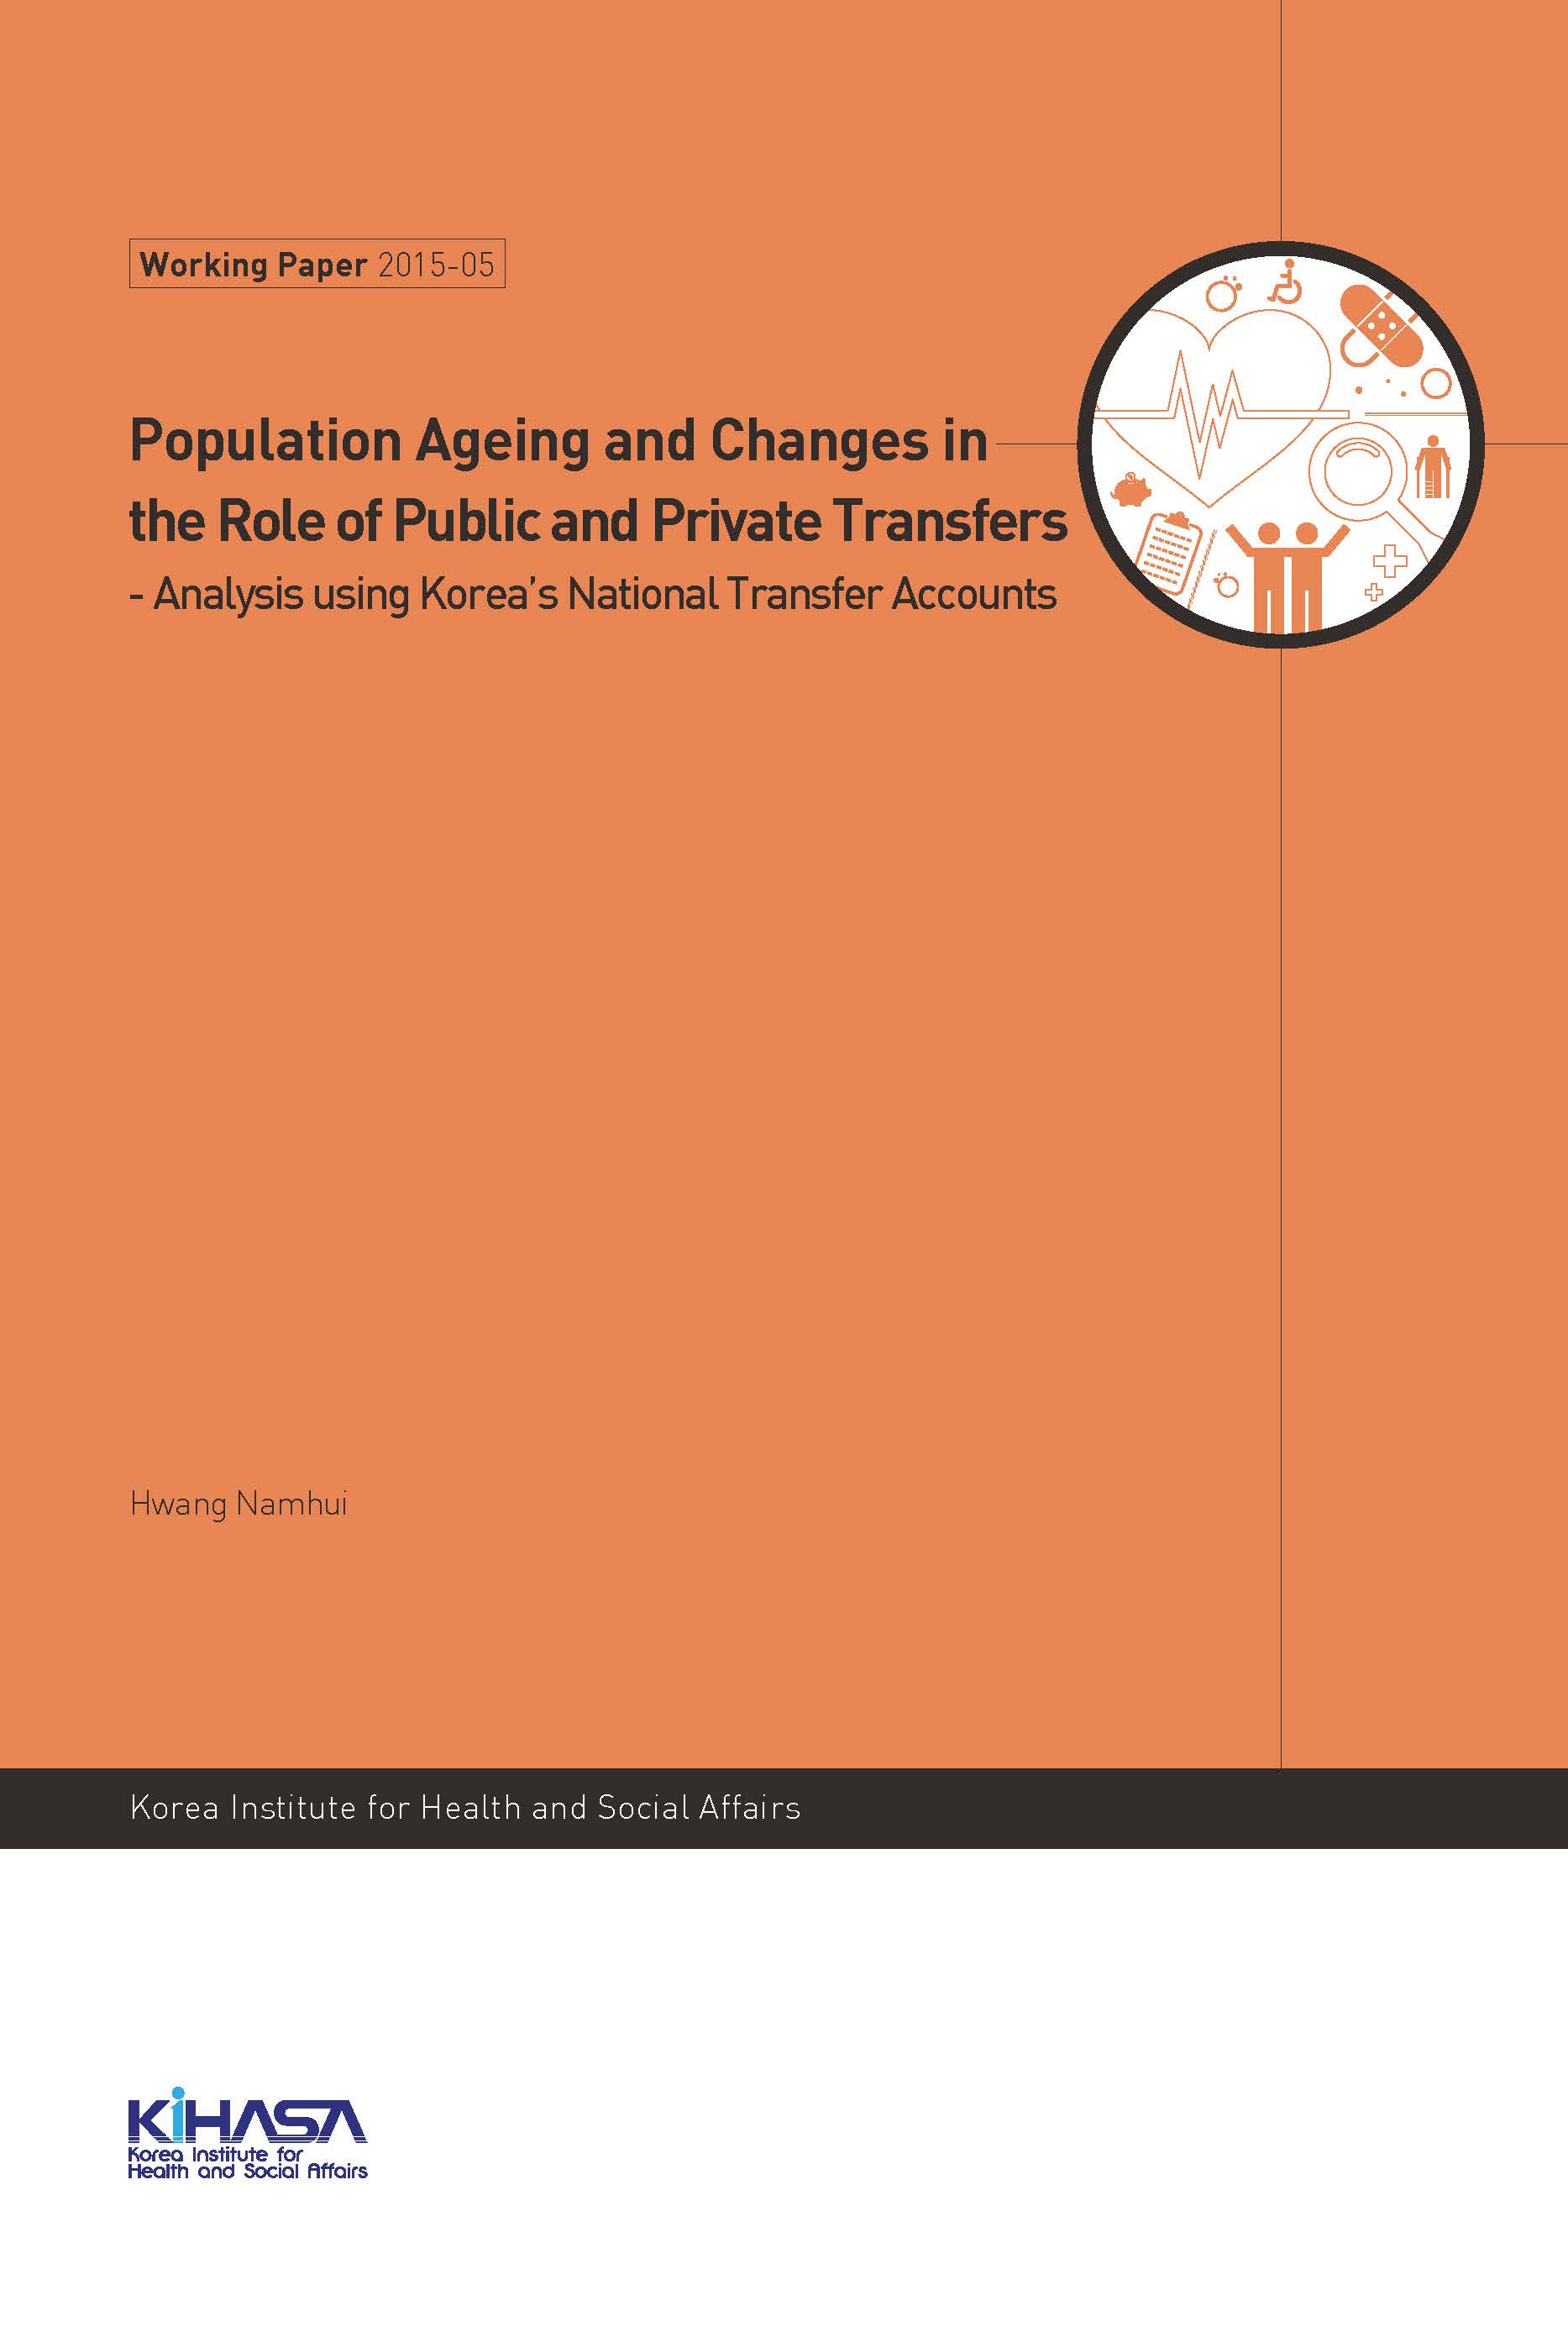 Population Ageing and Changes in the Role of Public and Private Transfers - Analysis using Korea’s National Transfer Accounts